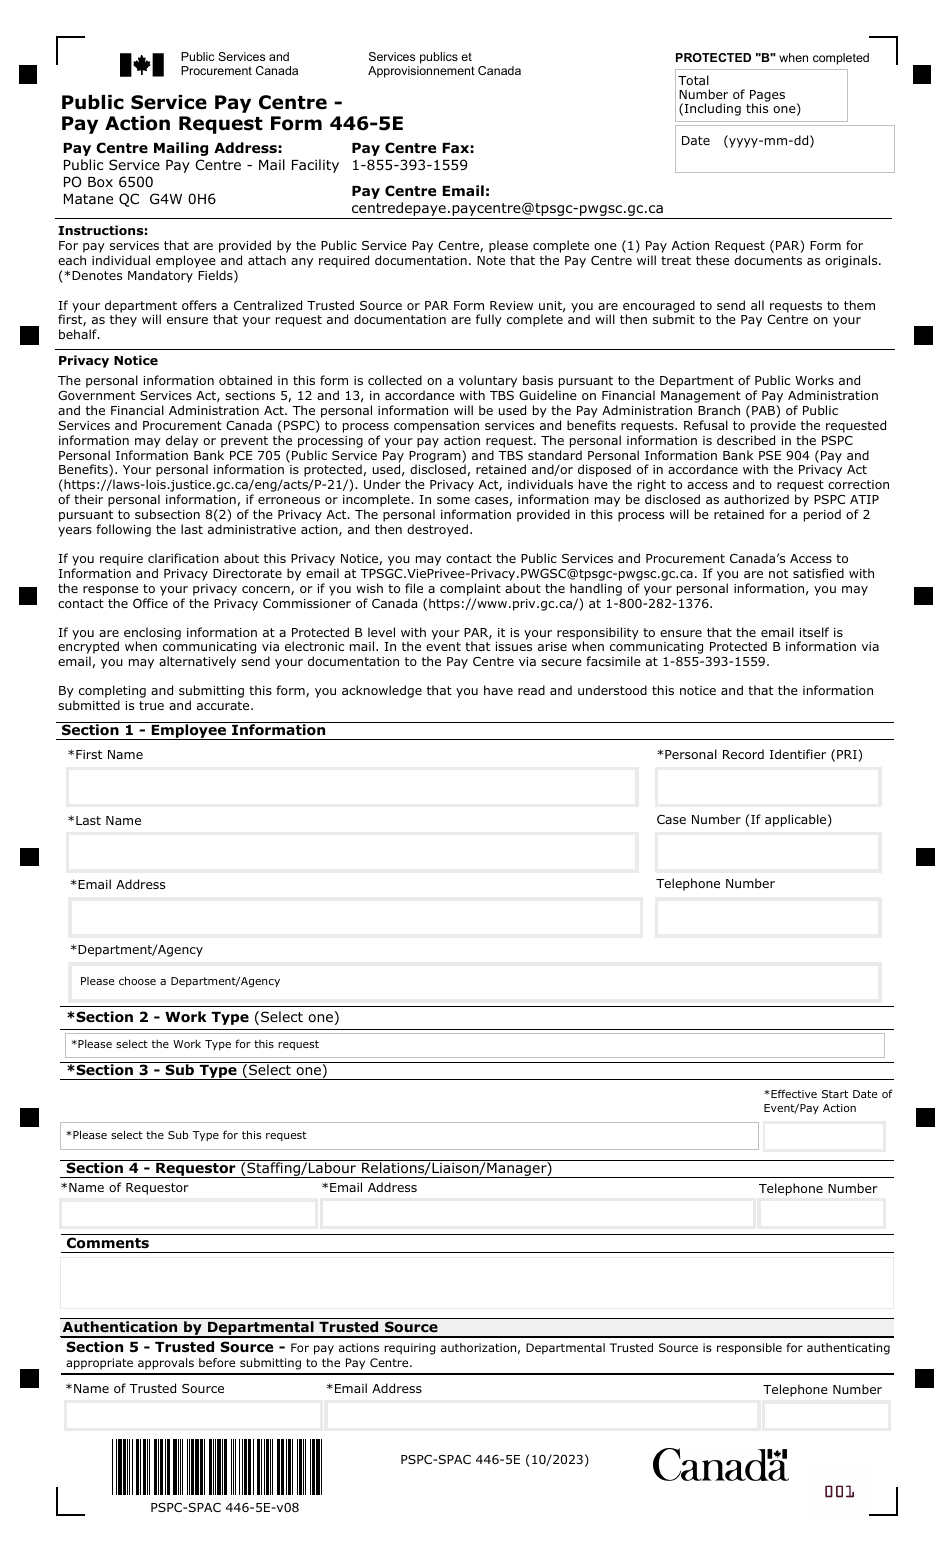 Form PSPC-SPAC446-5E Pay Action Request Form - Canada, Page 1